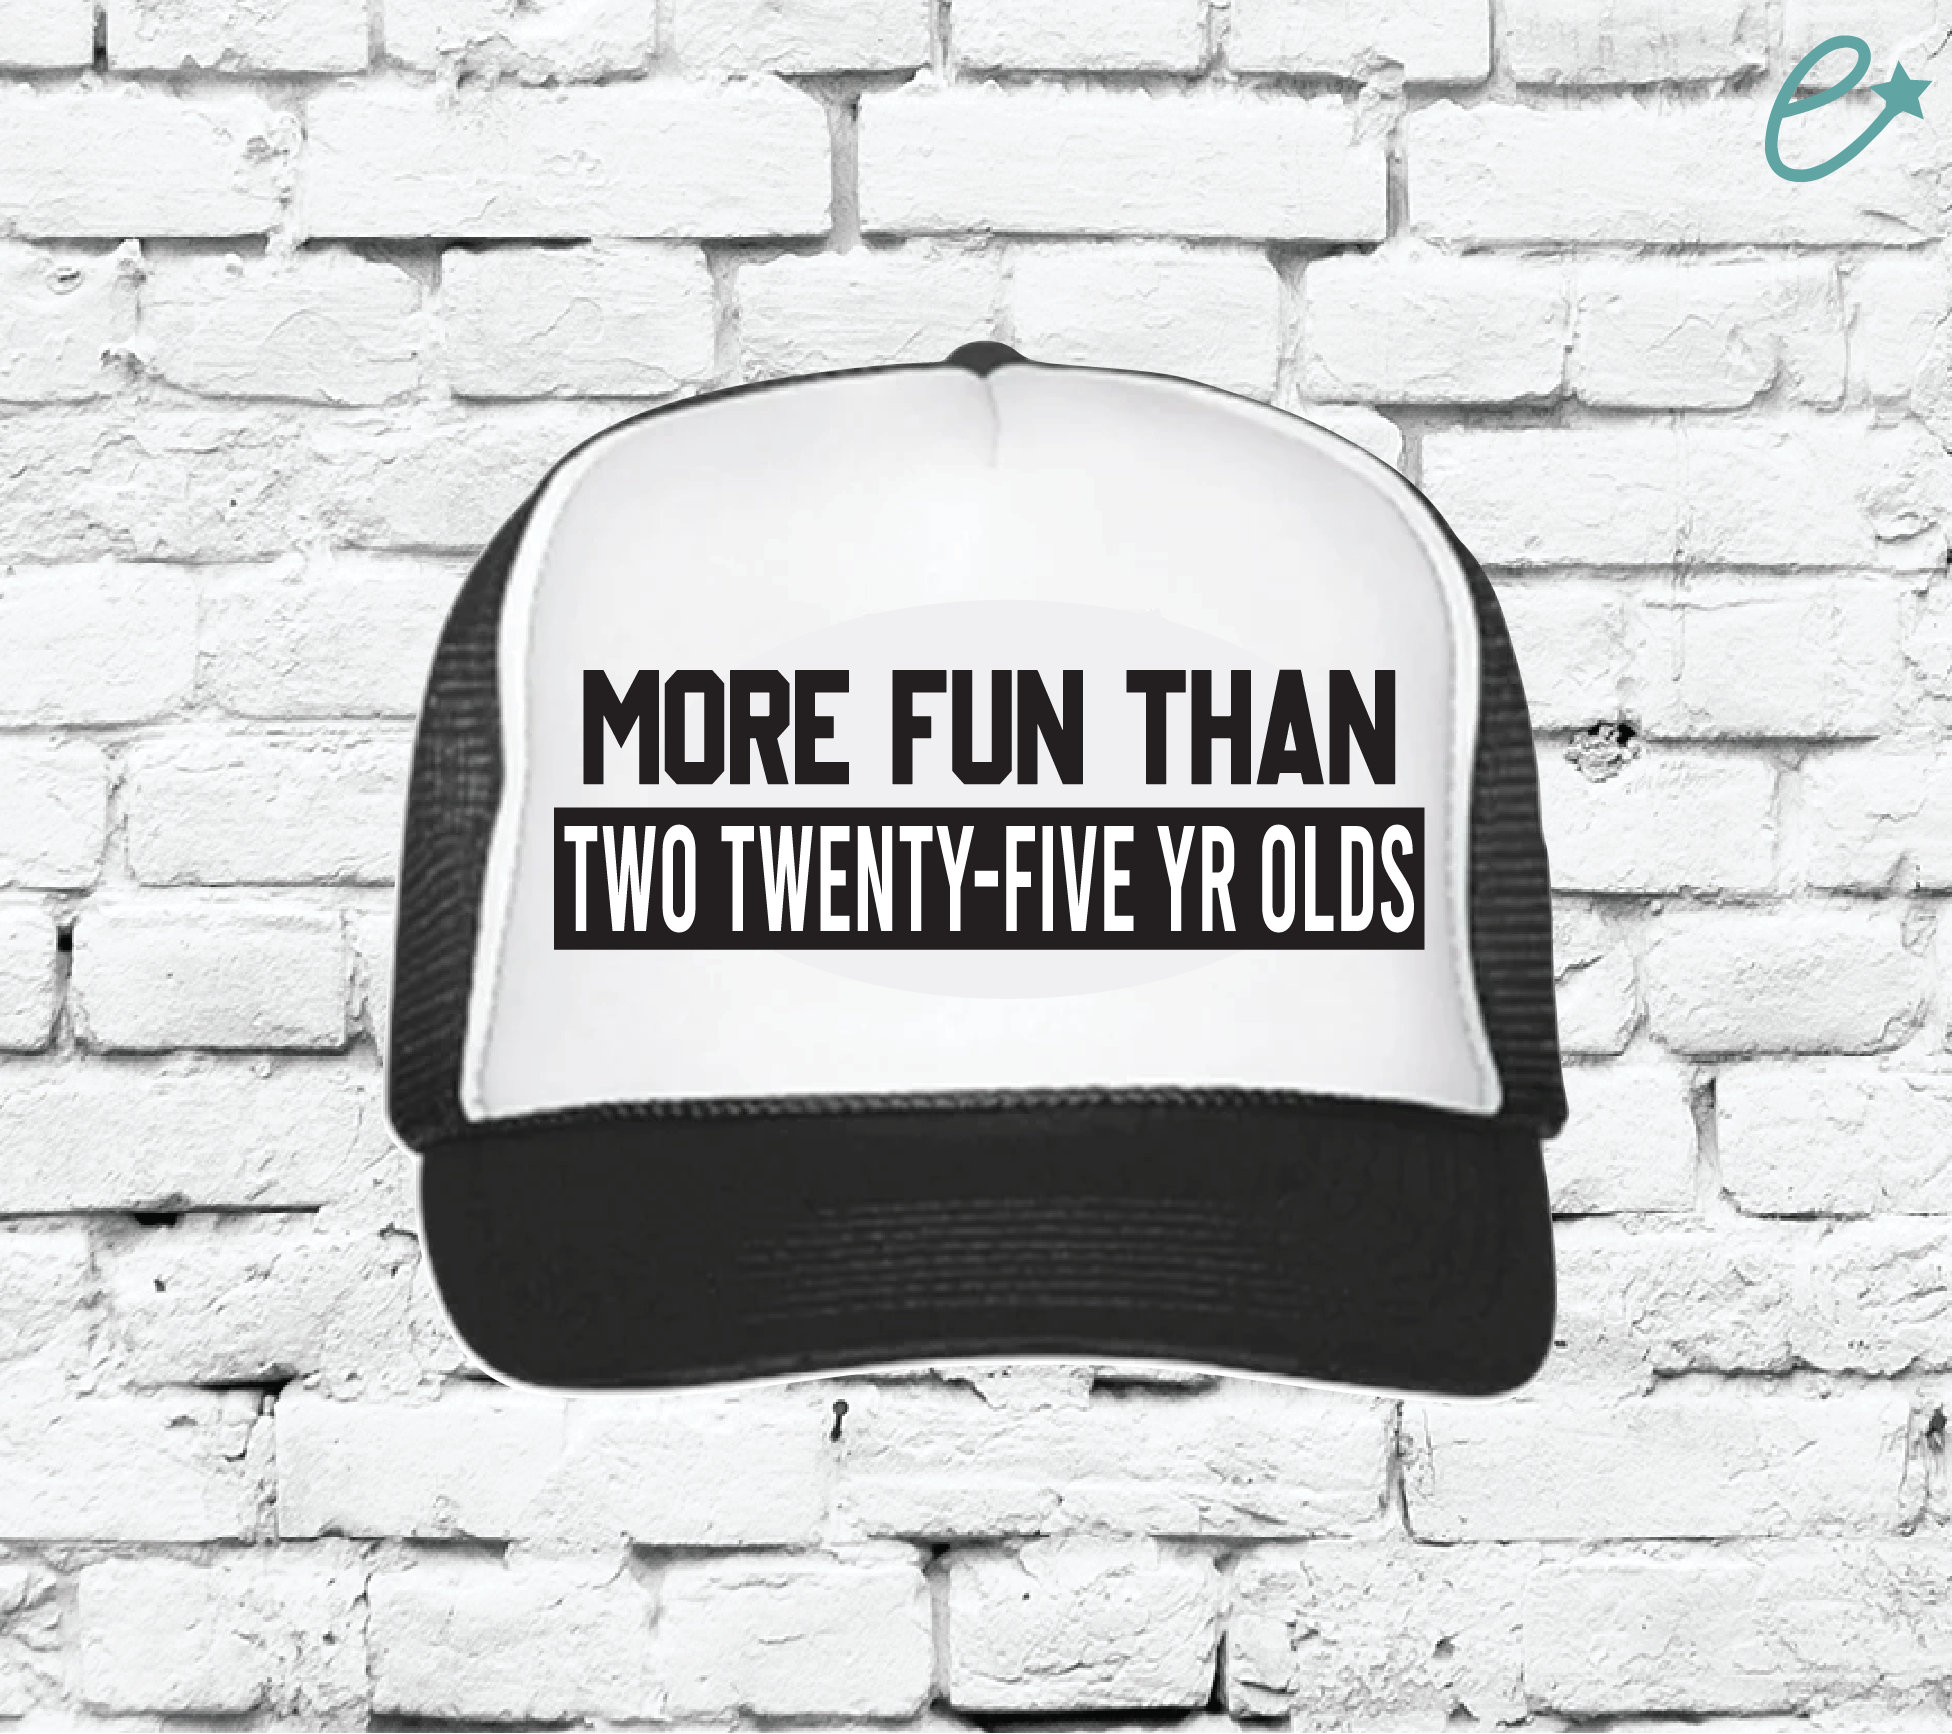 More Fun than two twenty-five year olds Trucker Hats Mesh Back Funny 50th Birthday Party